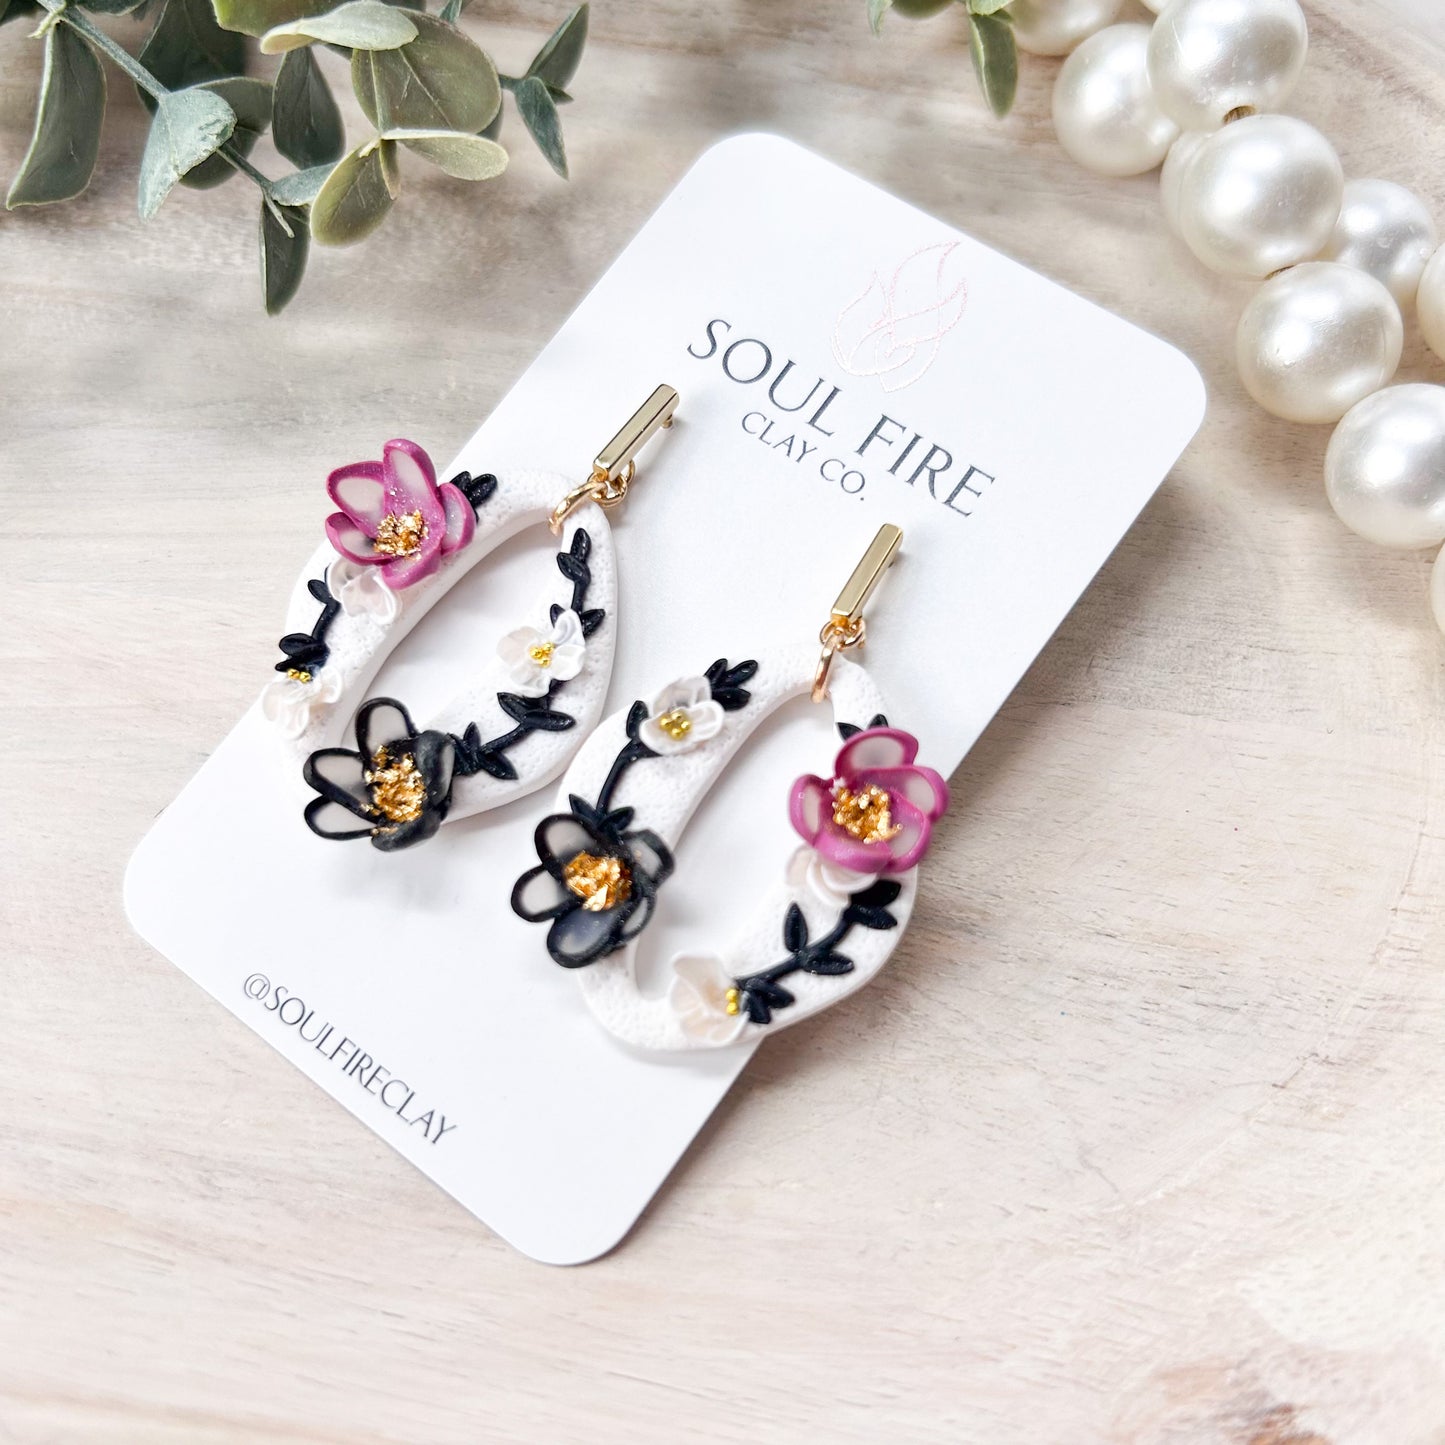 Translucent Floral Statement Earrings